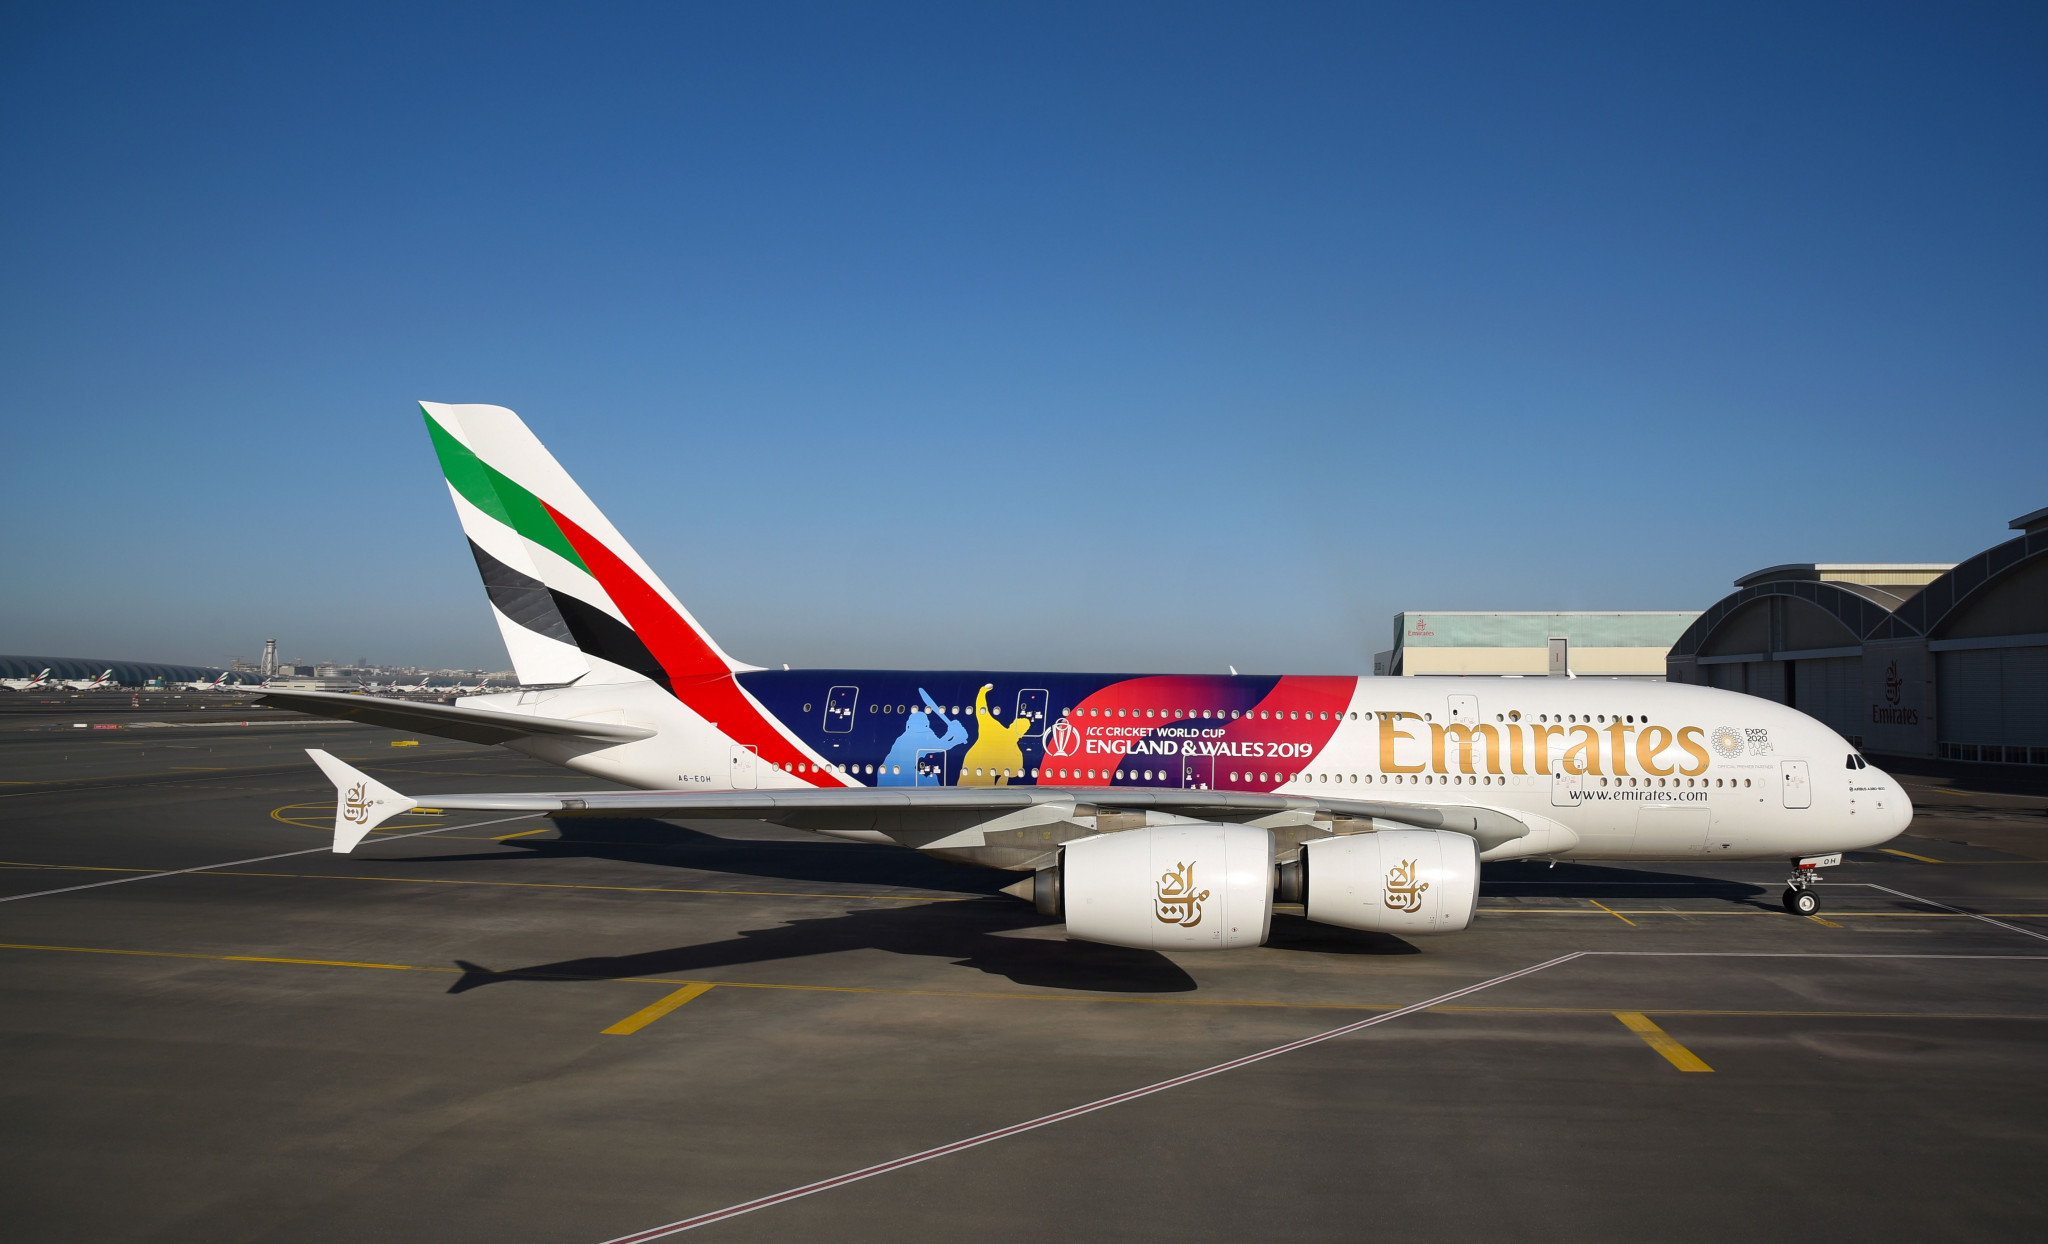 Emirates reveals special livery as countdown to 2019 Cricket World Cup continues